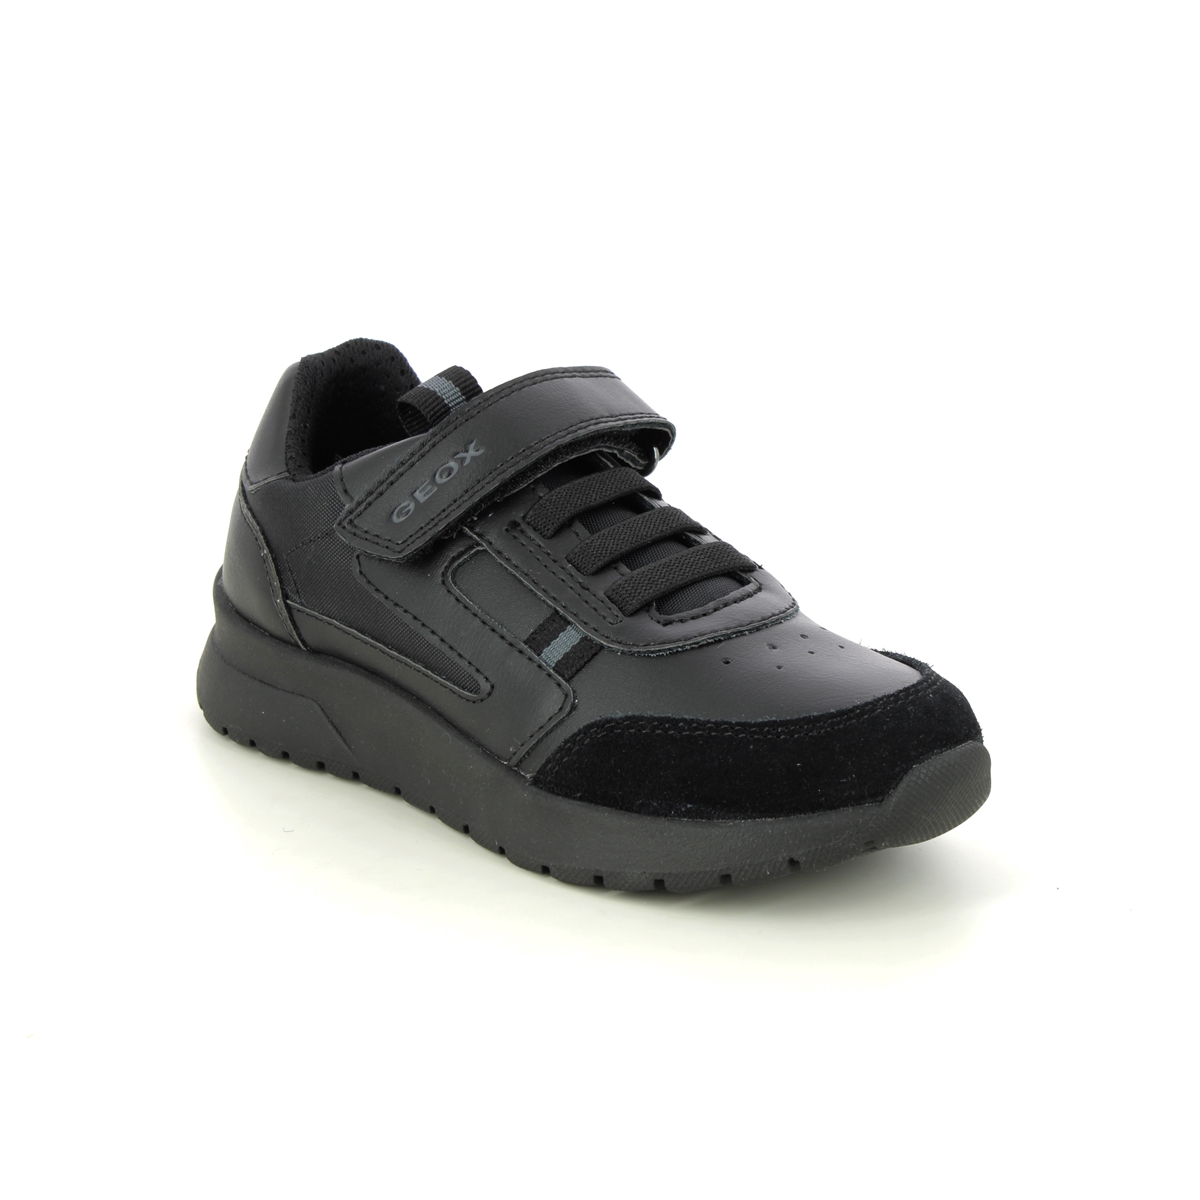 Geox Briezee Bungee Black Kids Boys Shoes J36GMA-C9999 in a Plain Man-made in Size 33